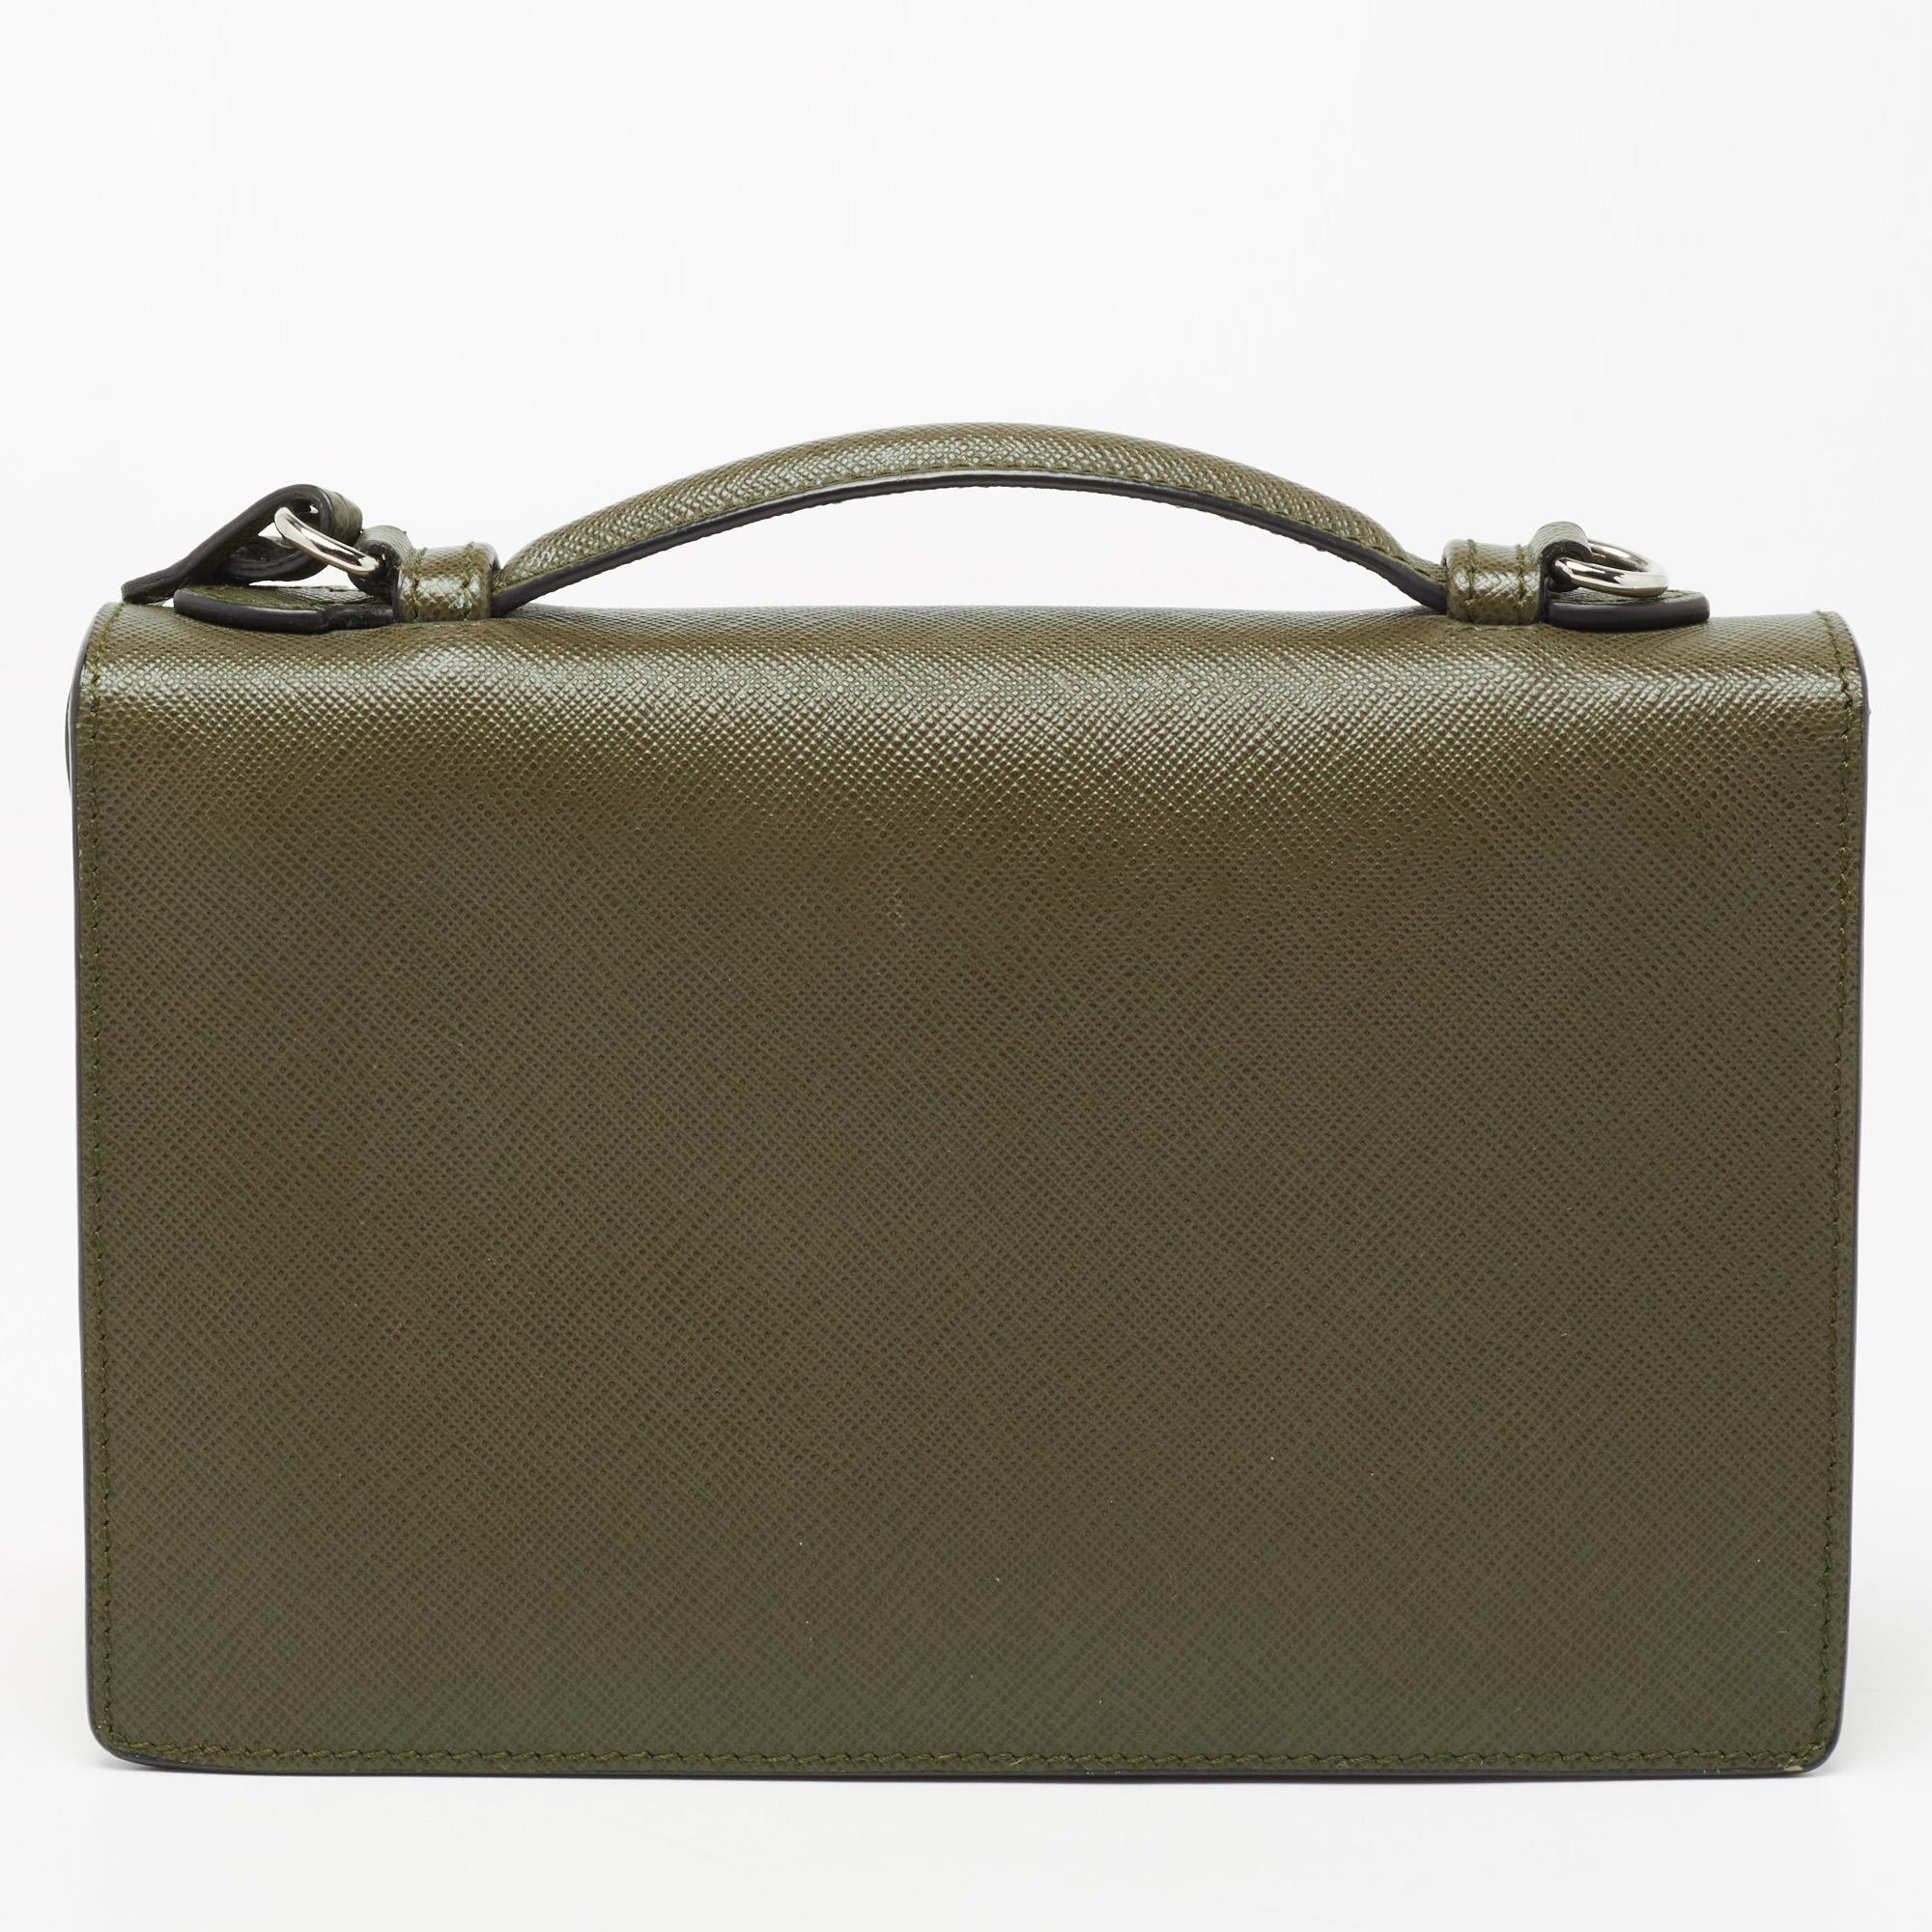 This mini Sound bag from Prada is a style you'll love having in your collection. Crafted with olive green Saffiano Lux leather, it features a structured silhouette with a front flap secured by a silver-tone metal lock. The bag comes with a